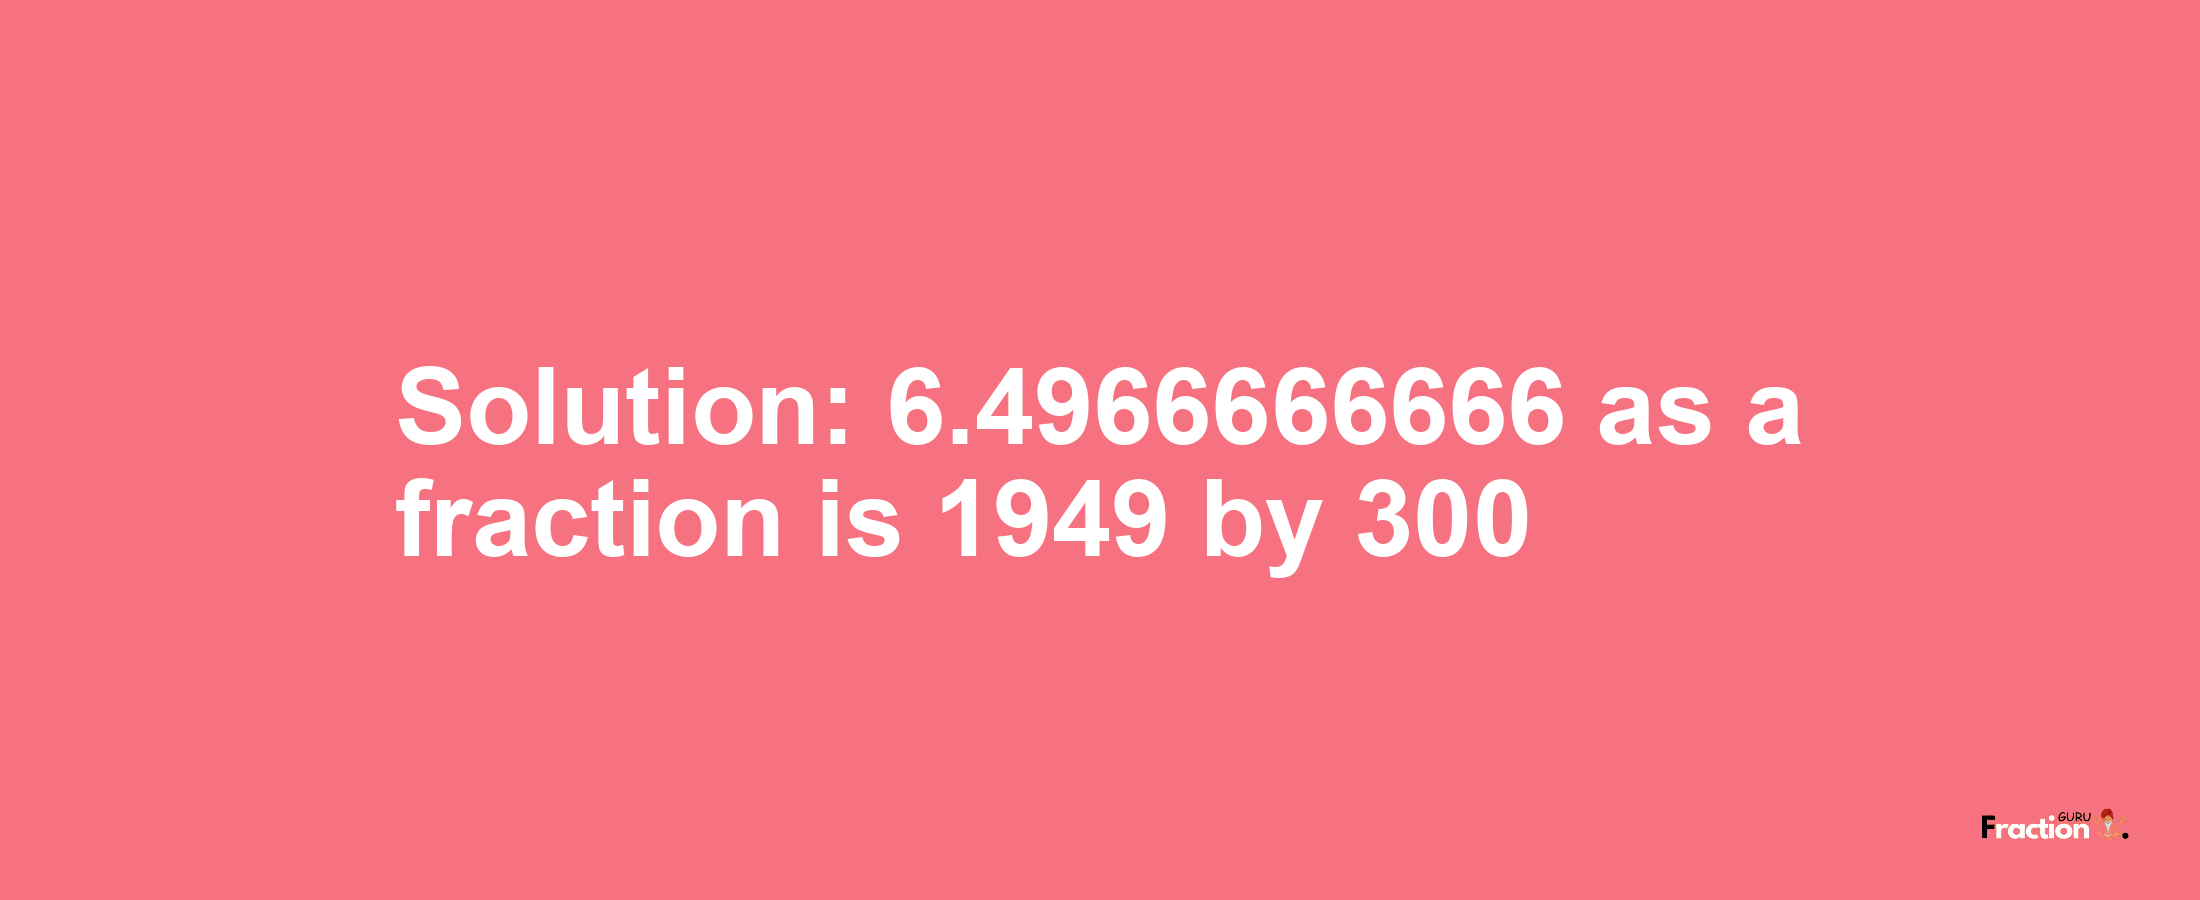 Solution:6.4966666666 as a fraction is 1949/300